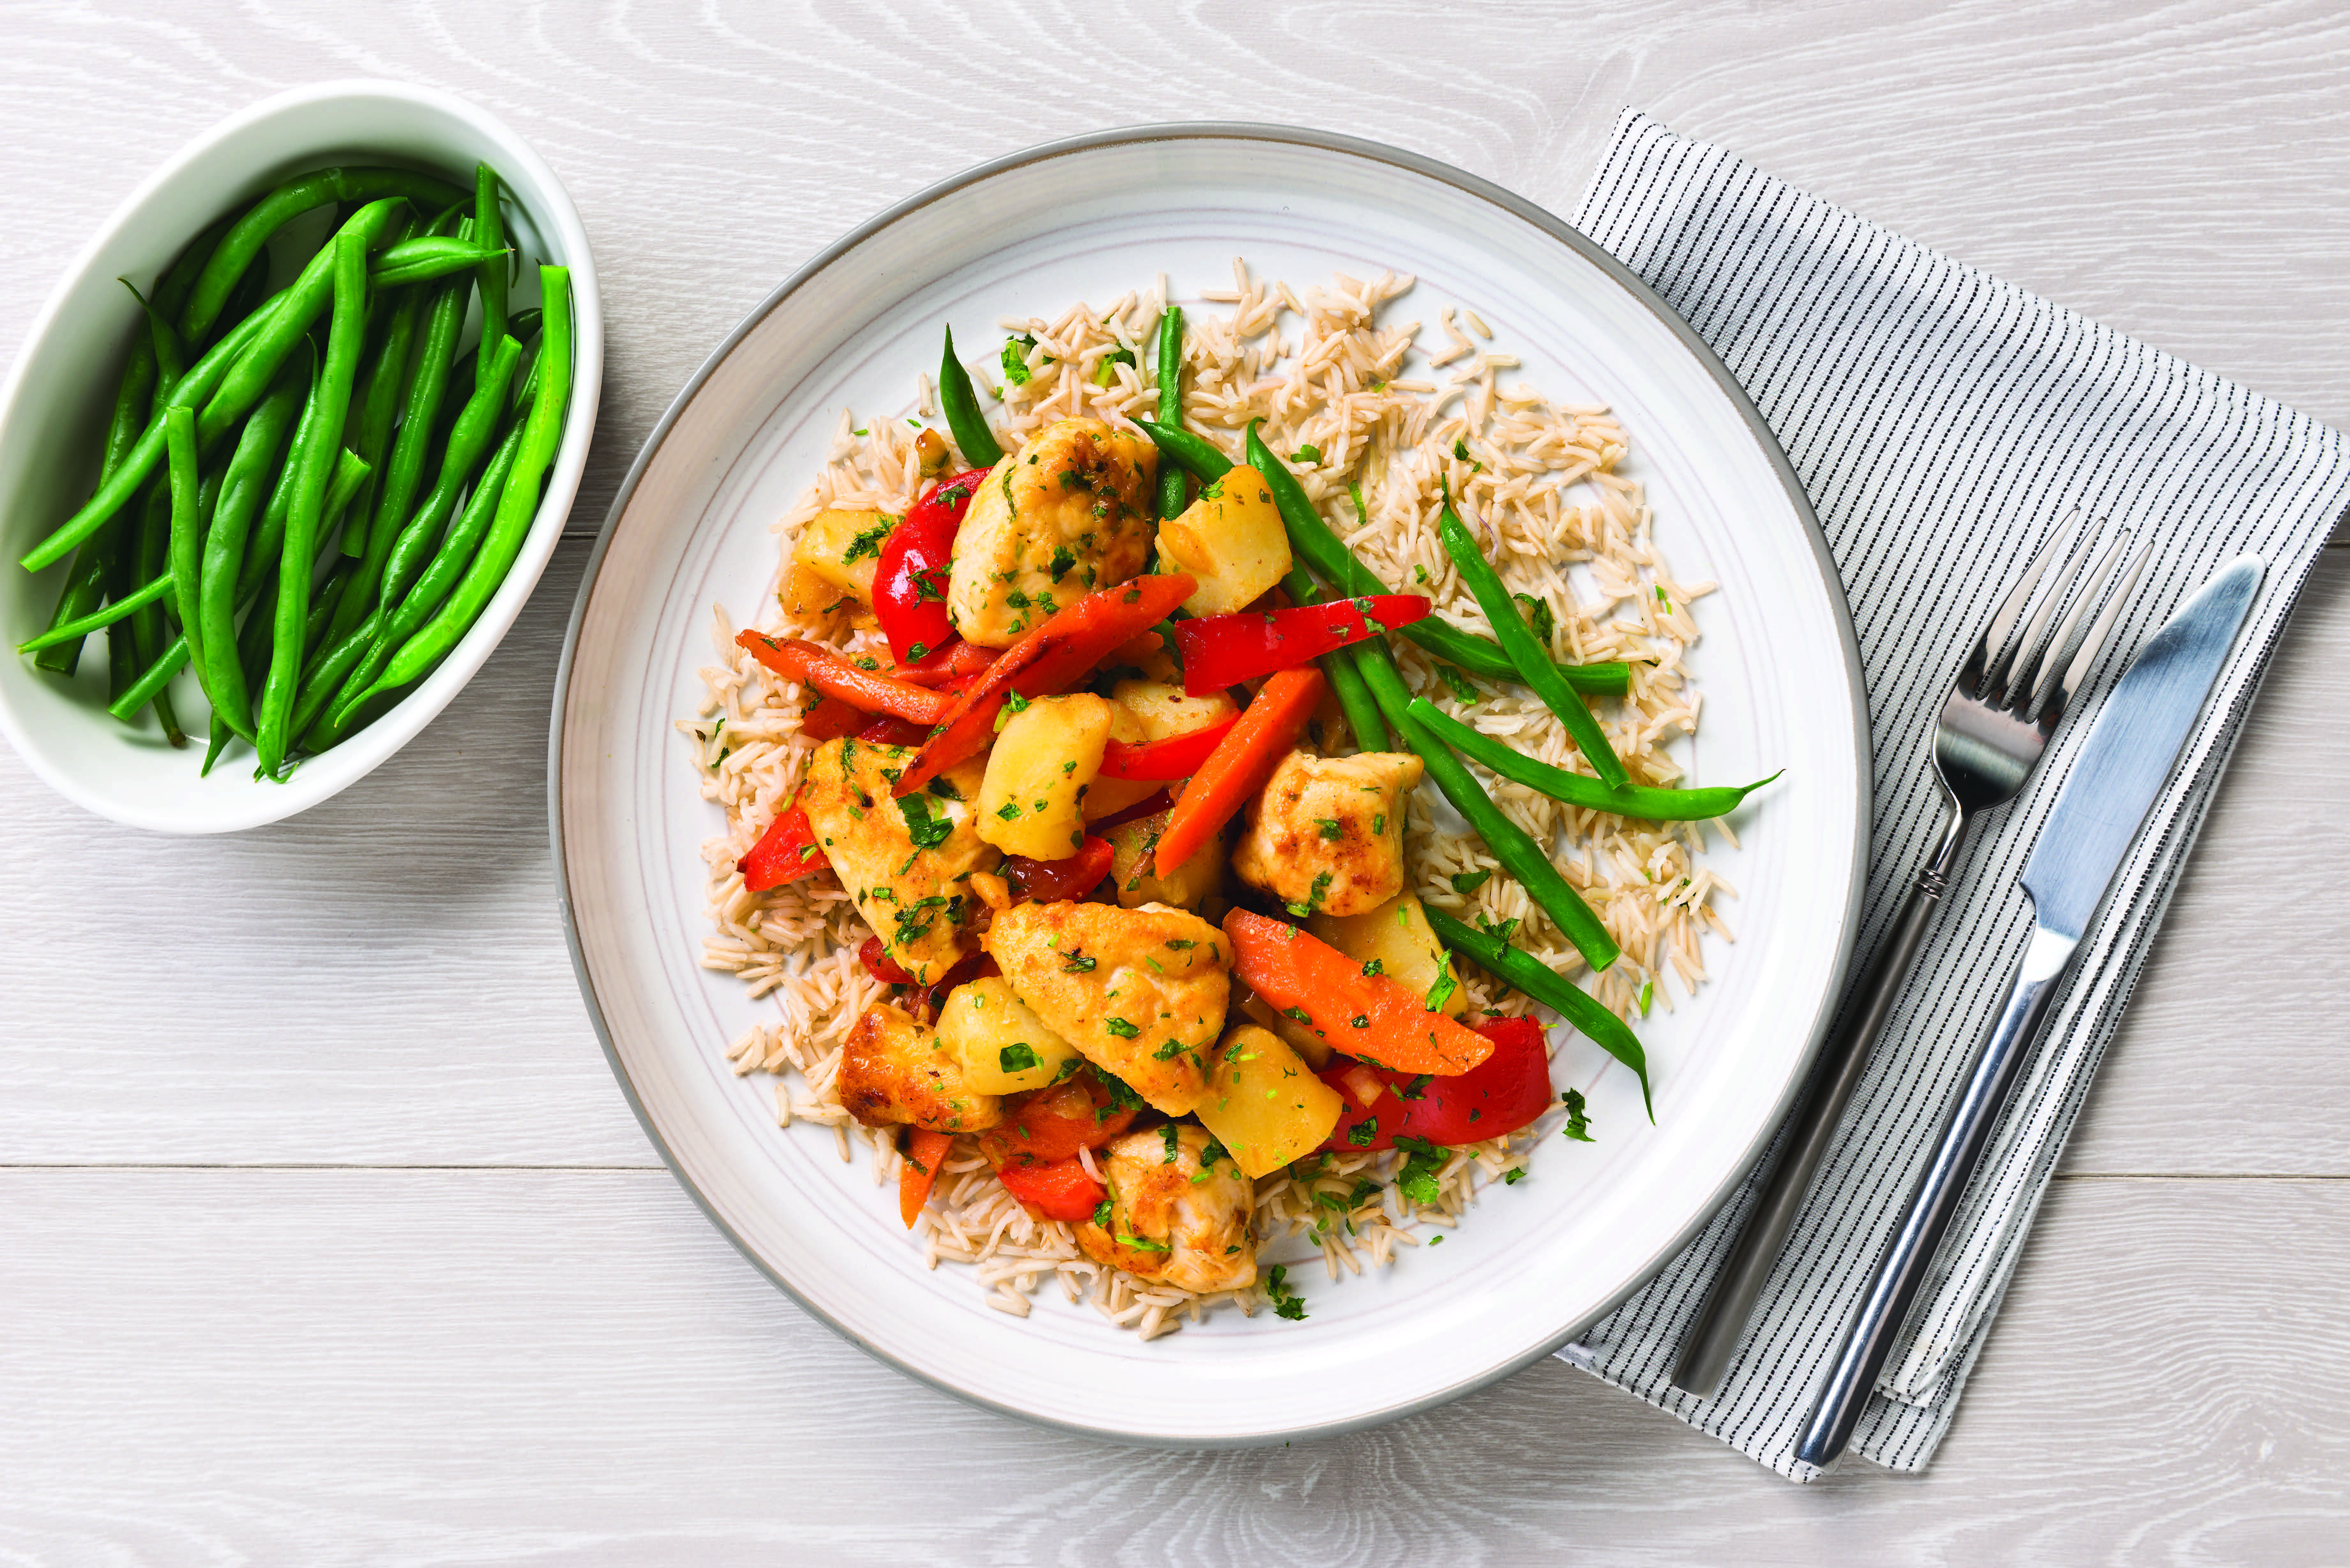 A serving of citrus chicken with rice and green beans